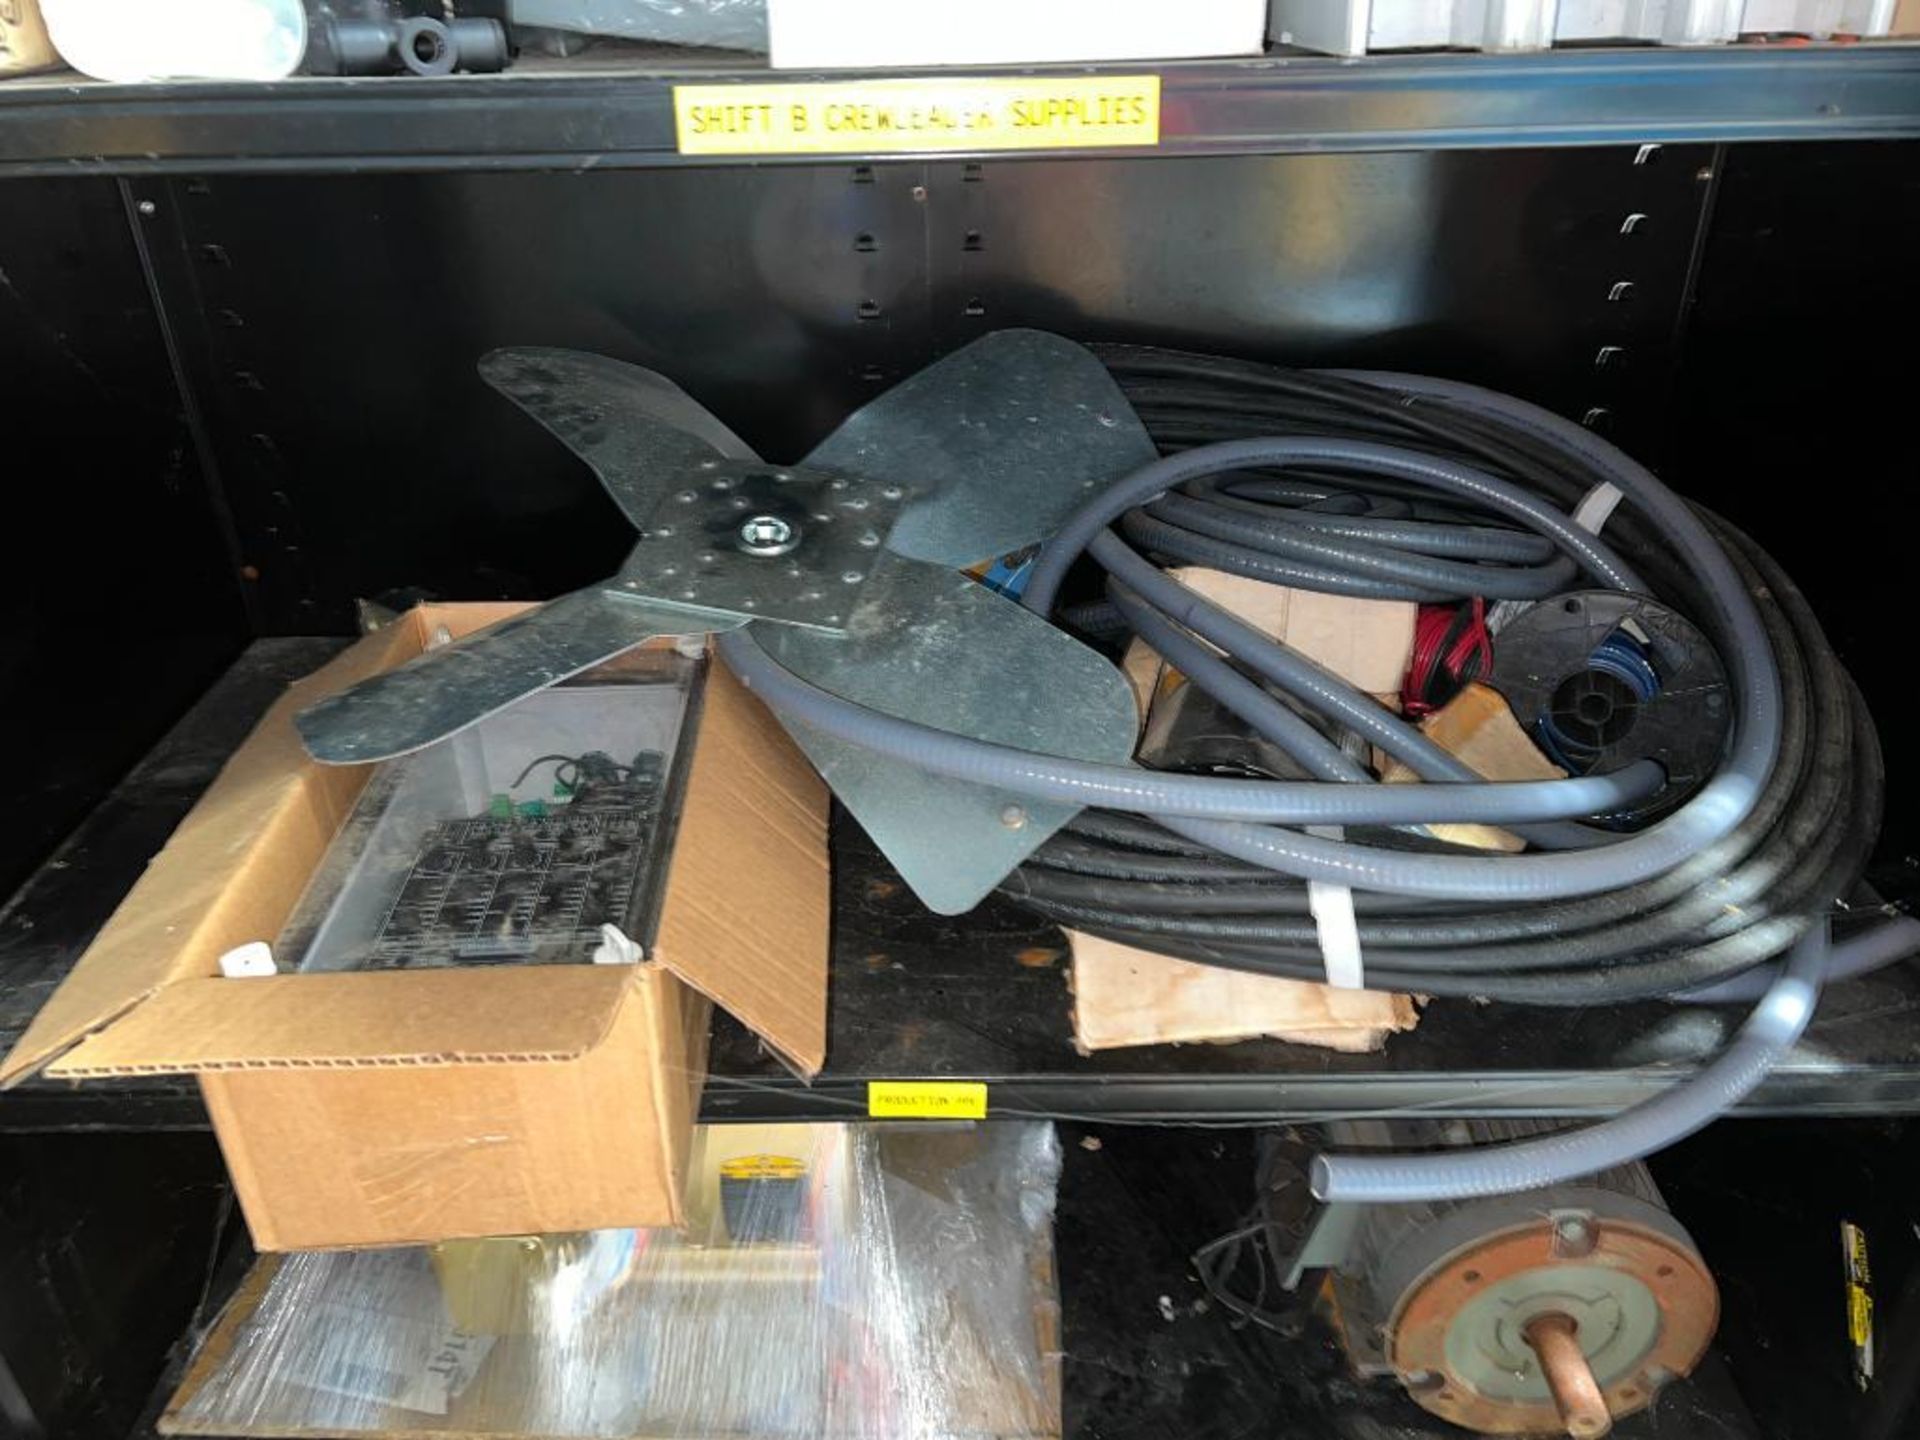 NEW Baldor Motor and Other, Fan Parts, Conduit, Switches and Cabinet - Rigging Fee: $125 - Image 3 of 4